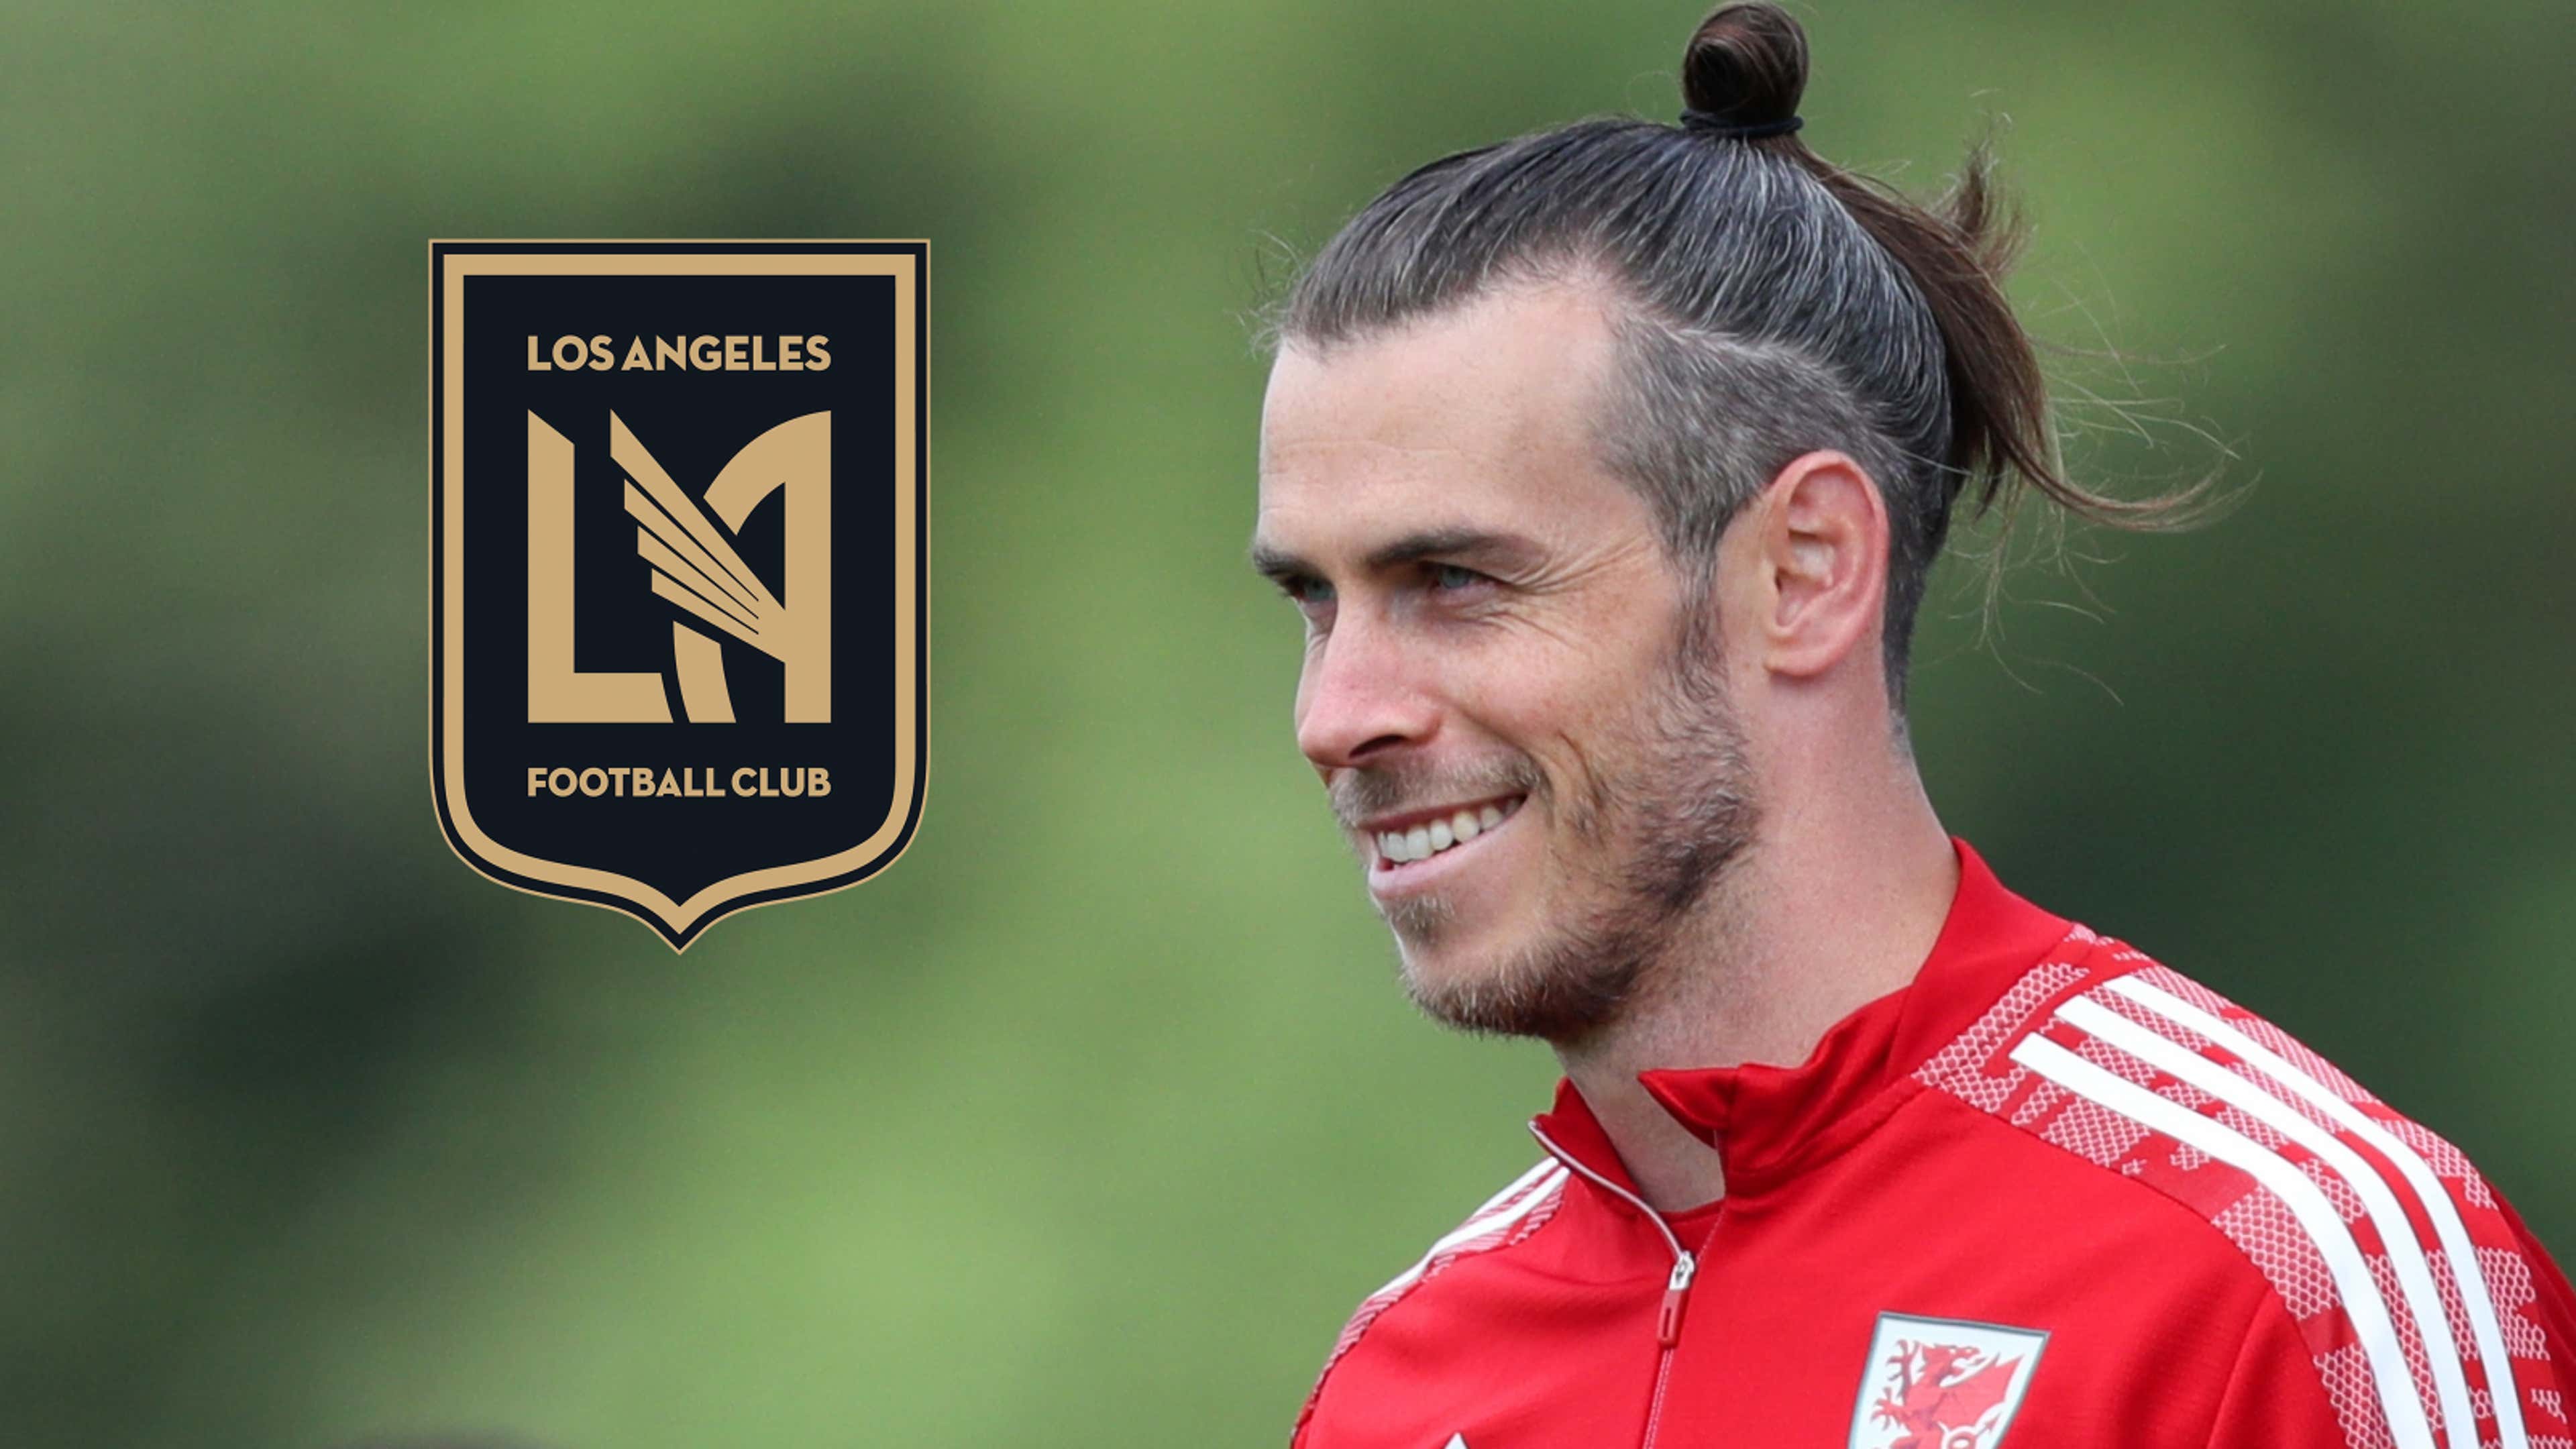 What will Gareth Bale's LAFC shirt number be?